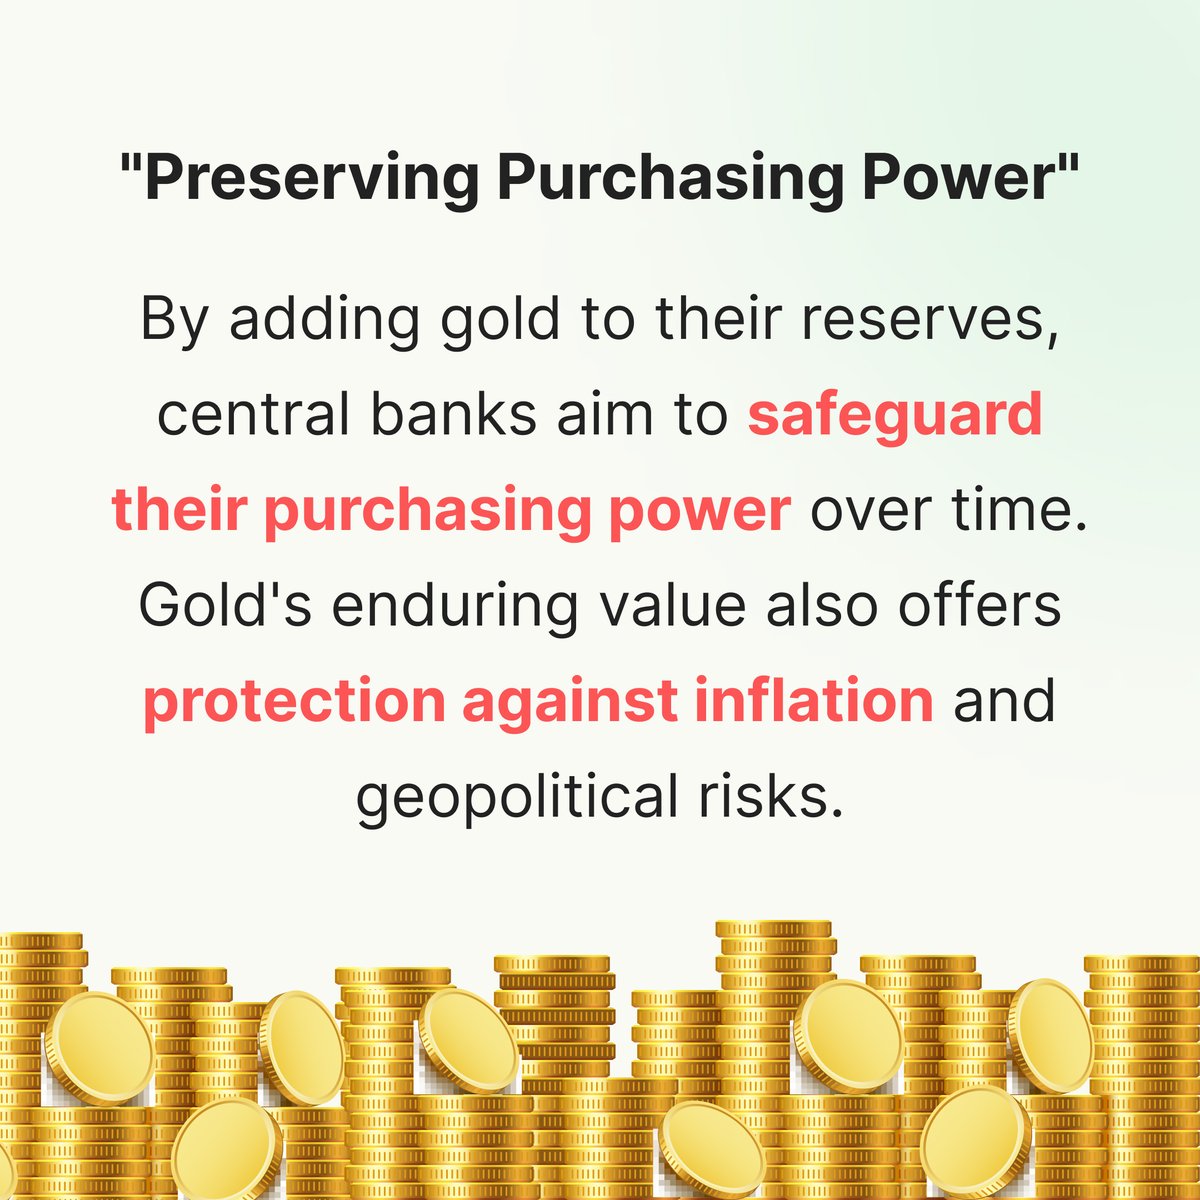 Unlocking the mystery behind central banks' affinity for gold - a strategic move for stability and prosperity.

#GoldReserves #FinancialStrategy #EconomicSecurity